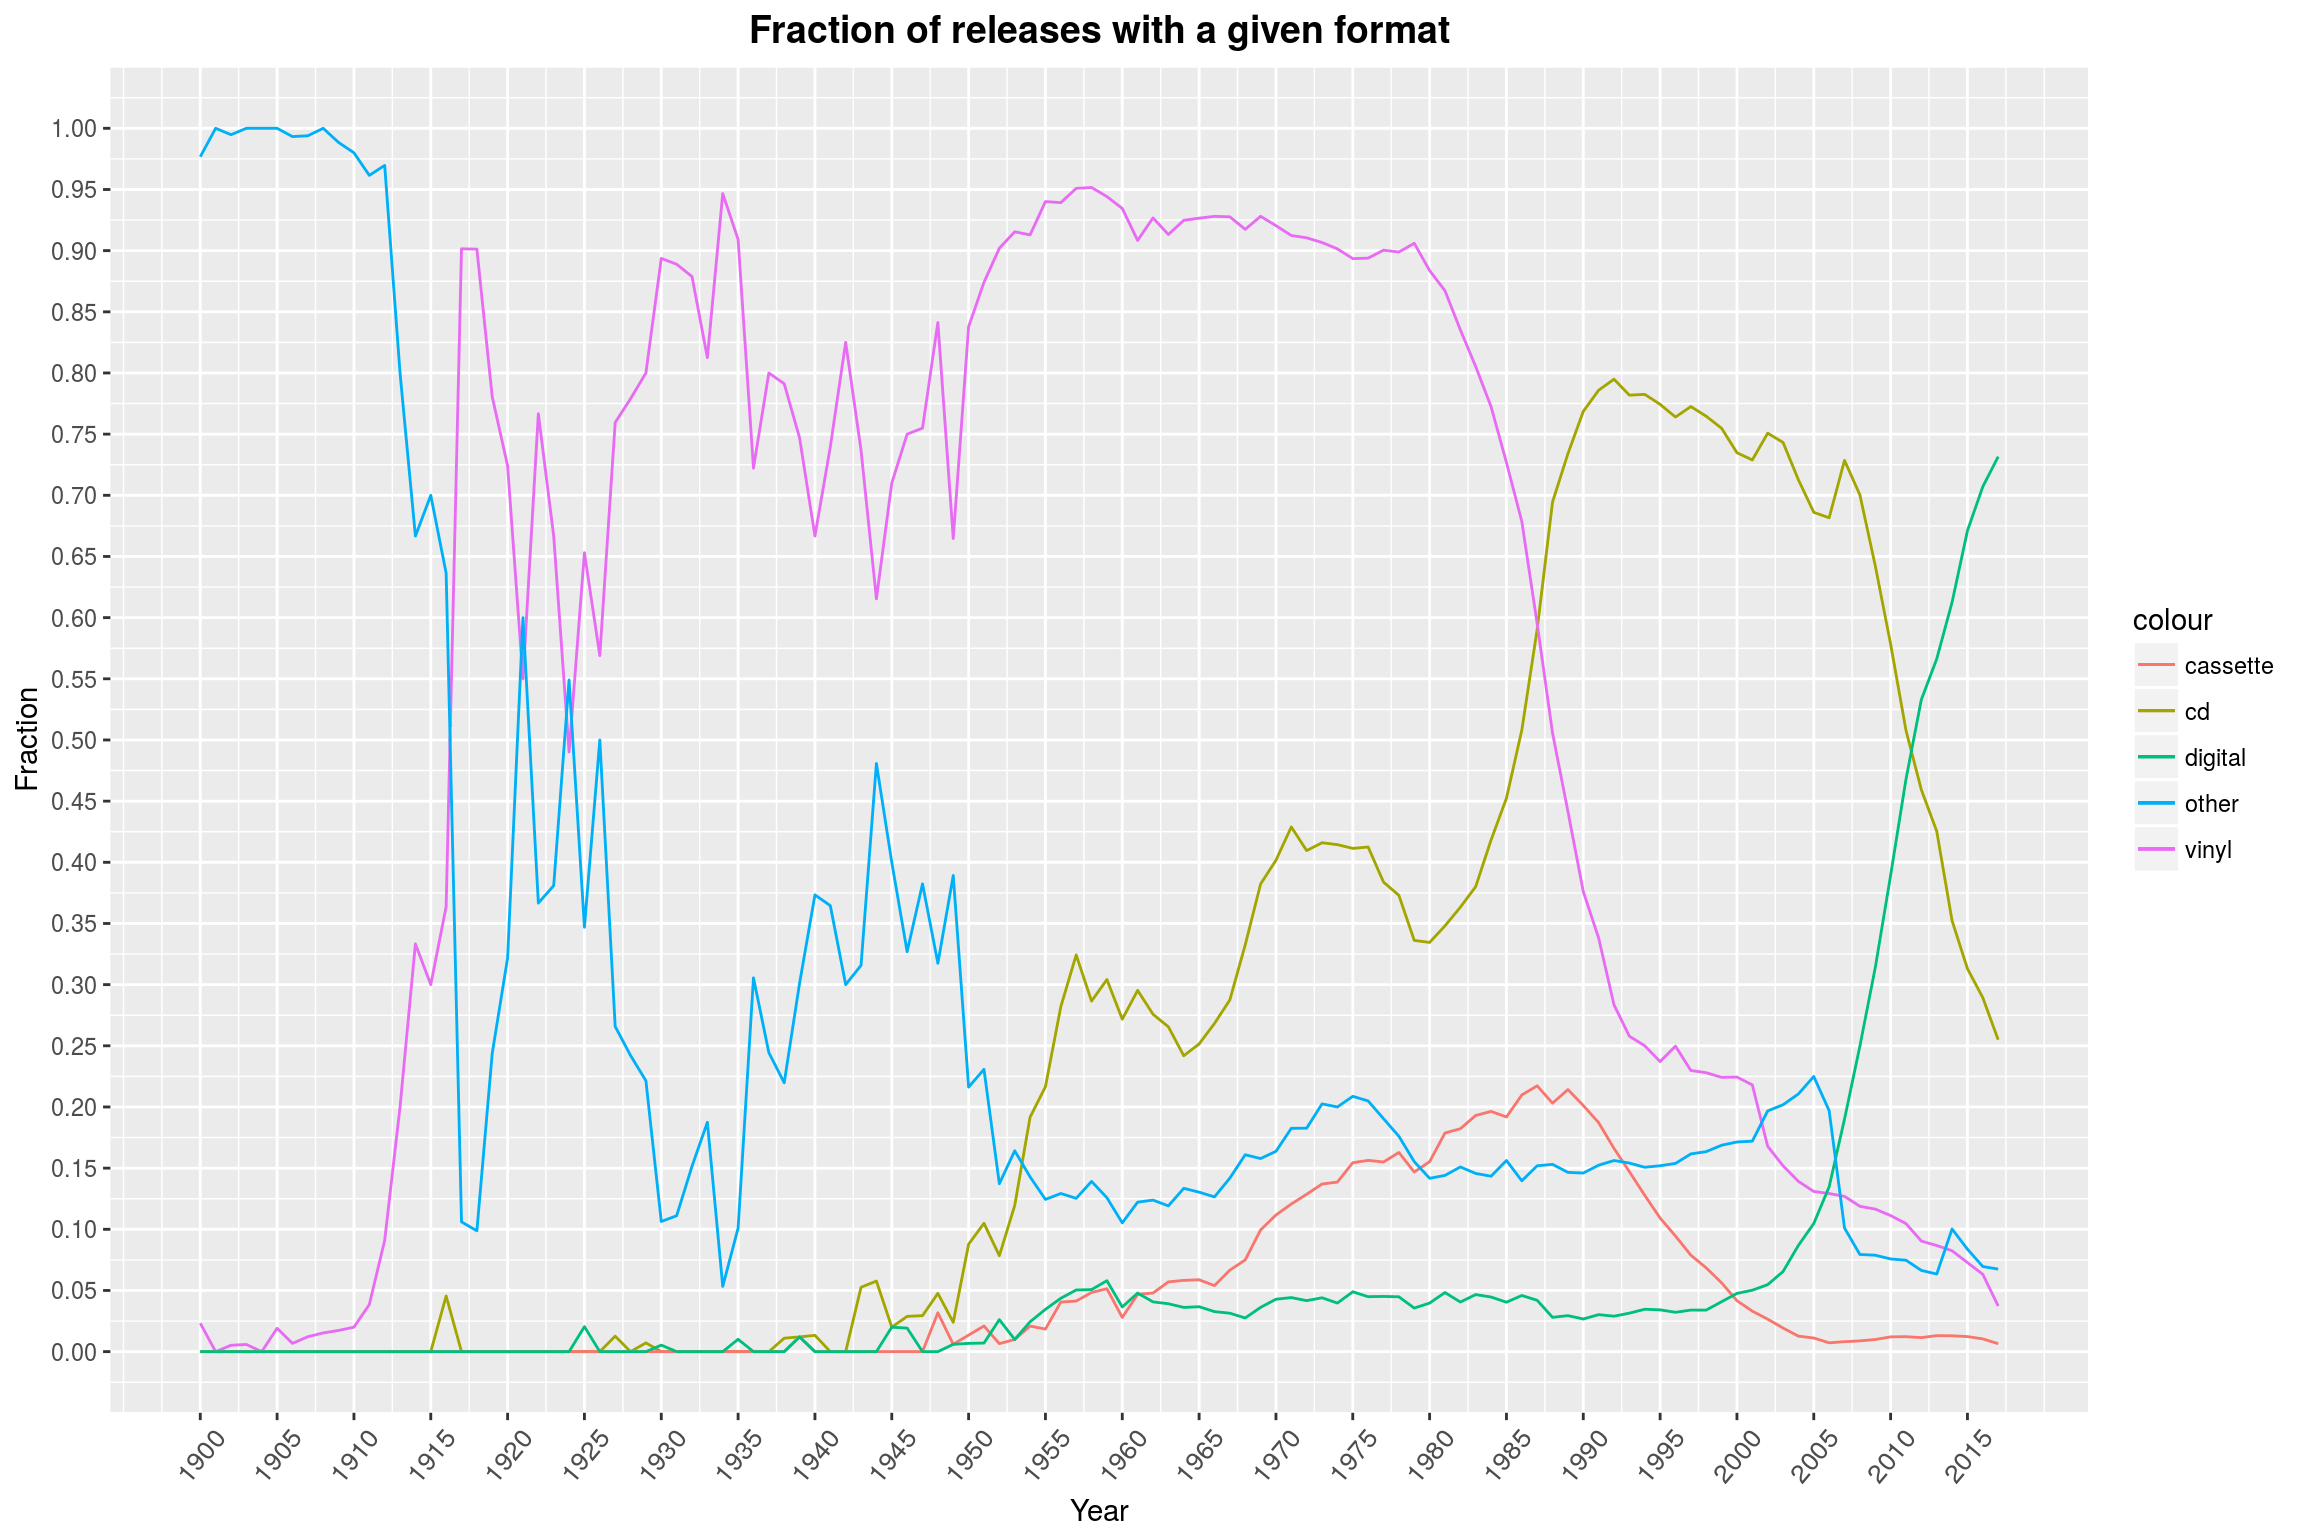 Fraction of releases with a given format per year